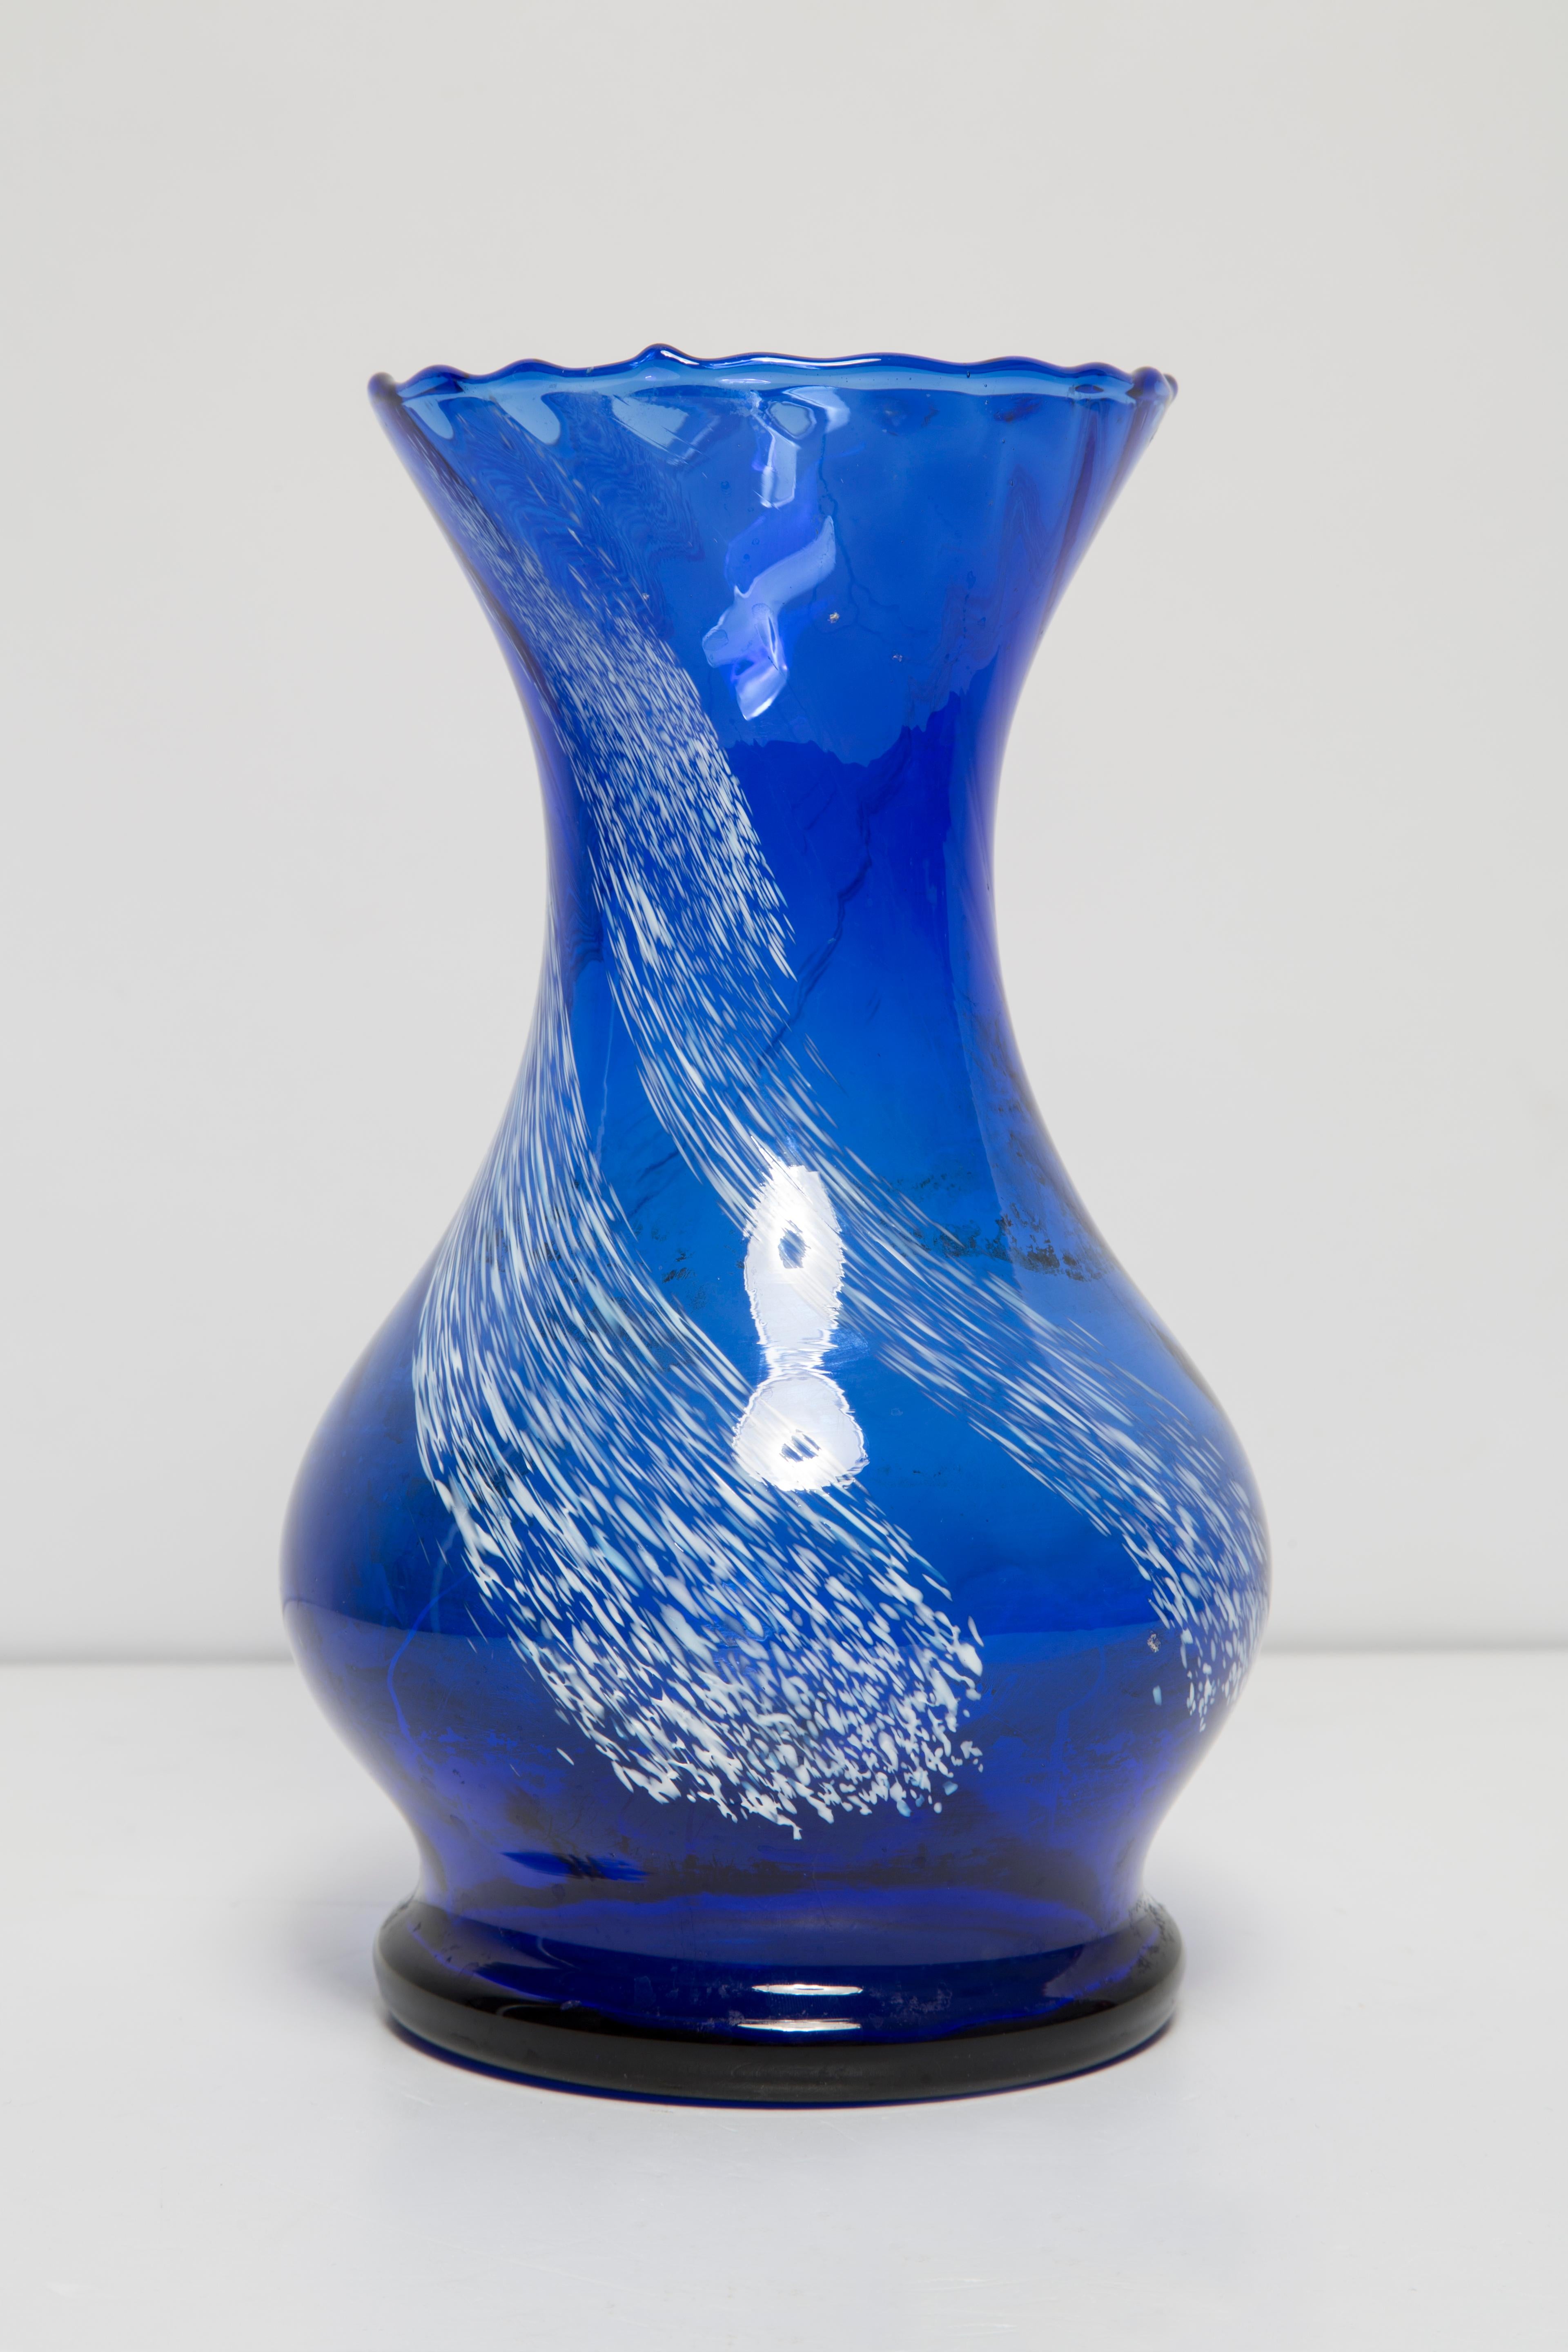 Polish Mid Century Vintage Blue and White Artistic Glass Vase, Europe, 1970s For Sale